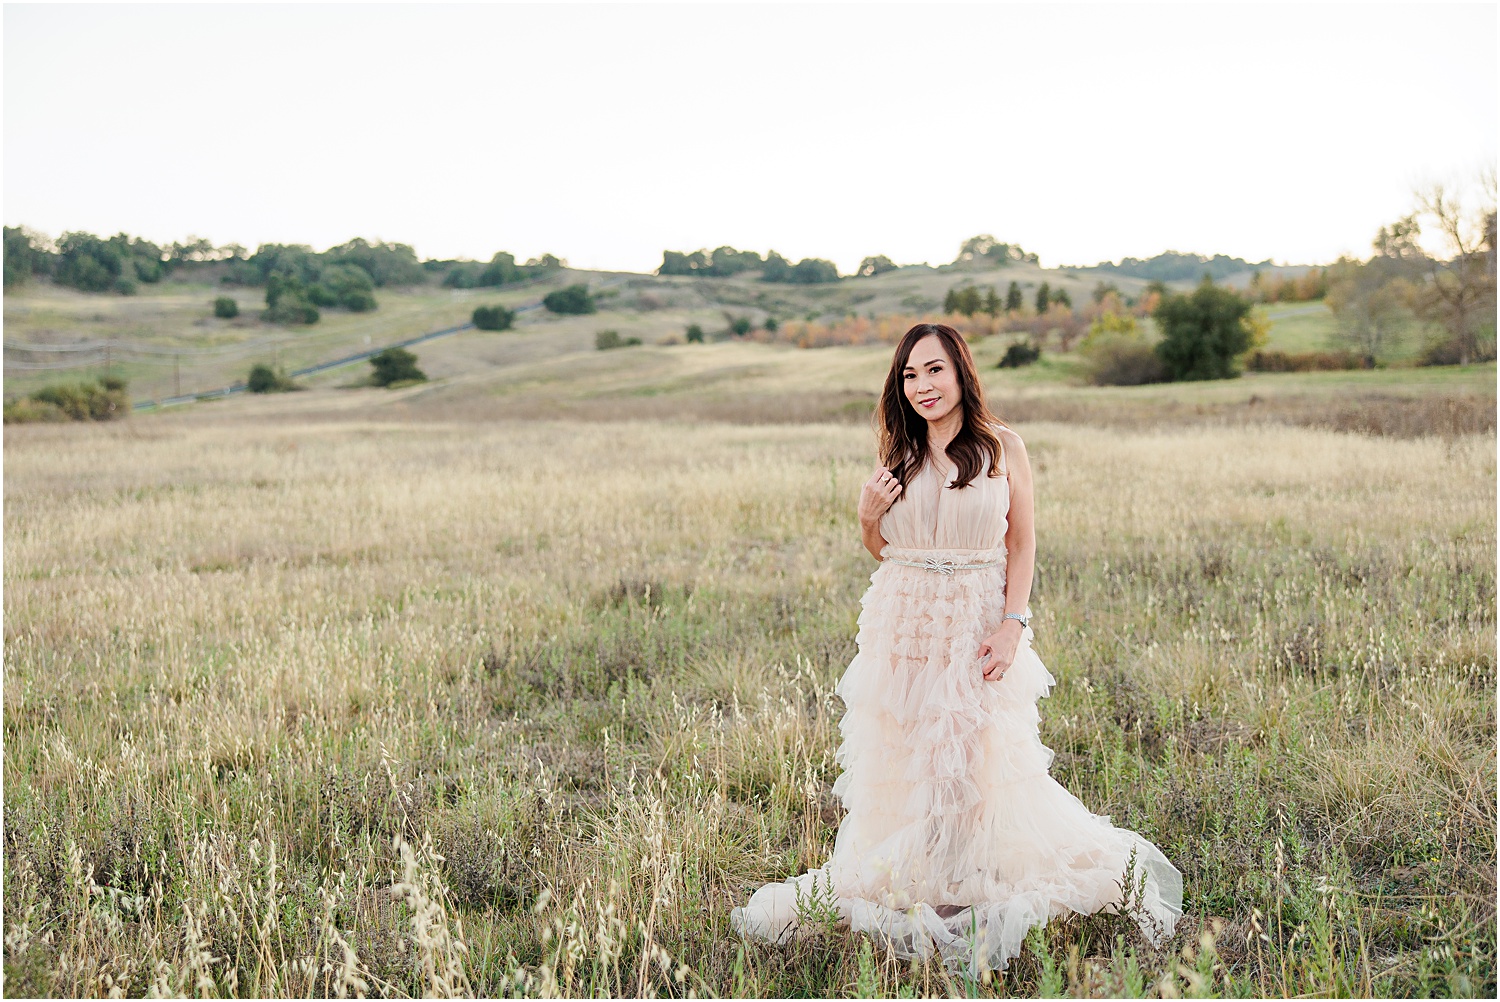 50th Birthday Photo Session | Woman in field in nude tulle dress